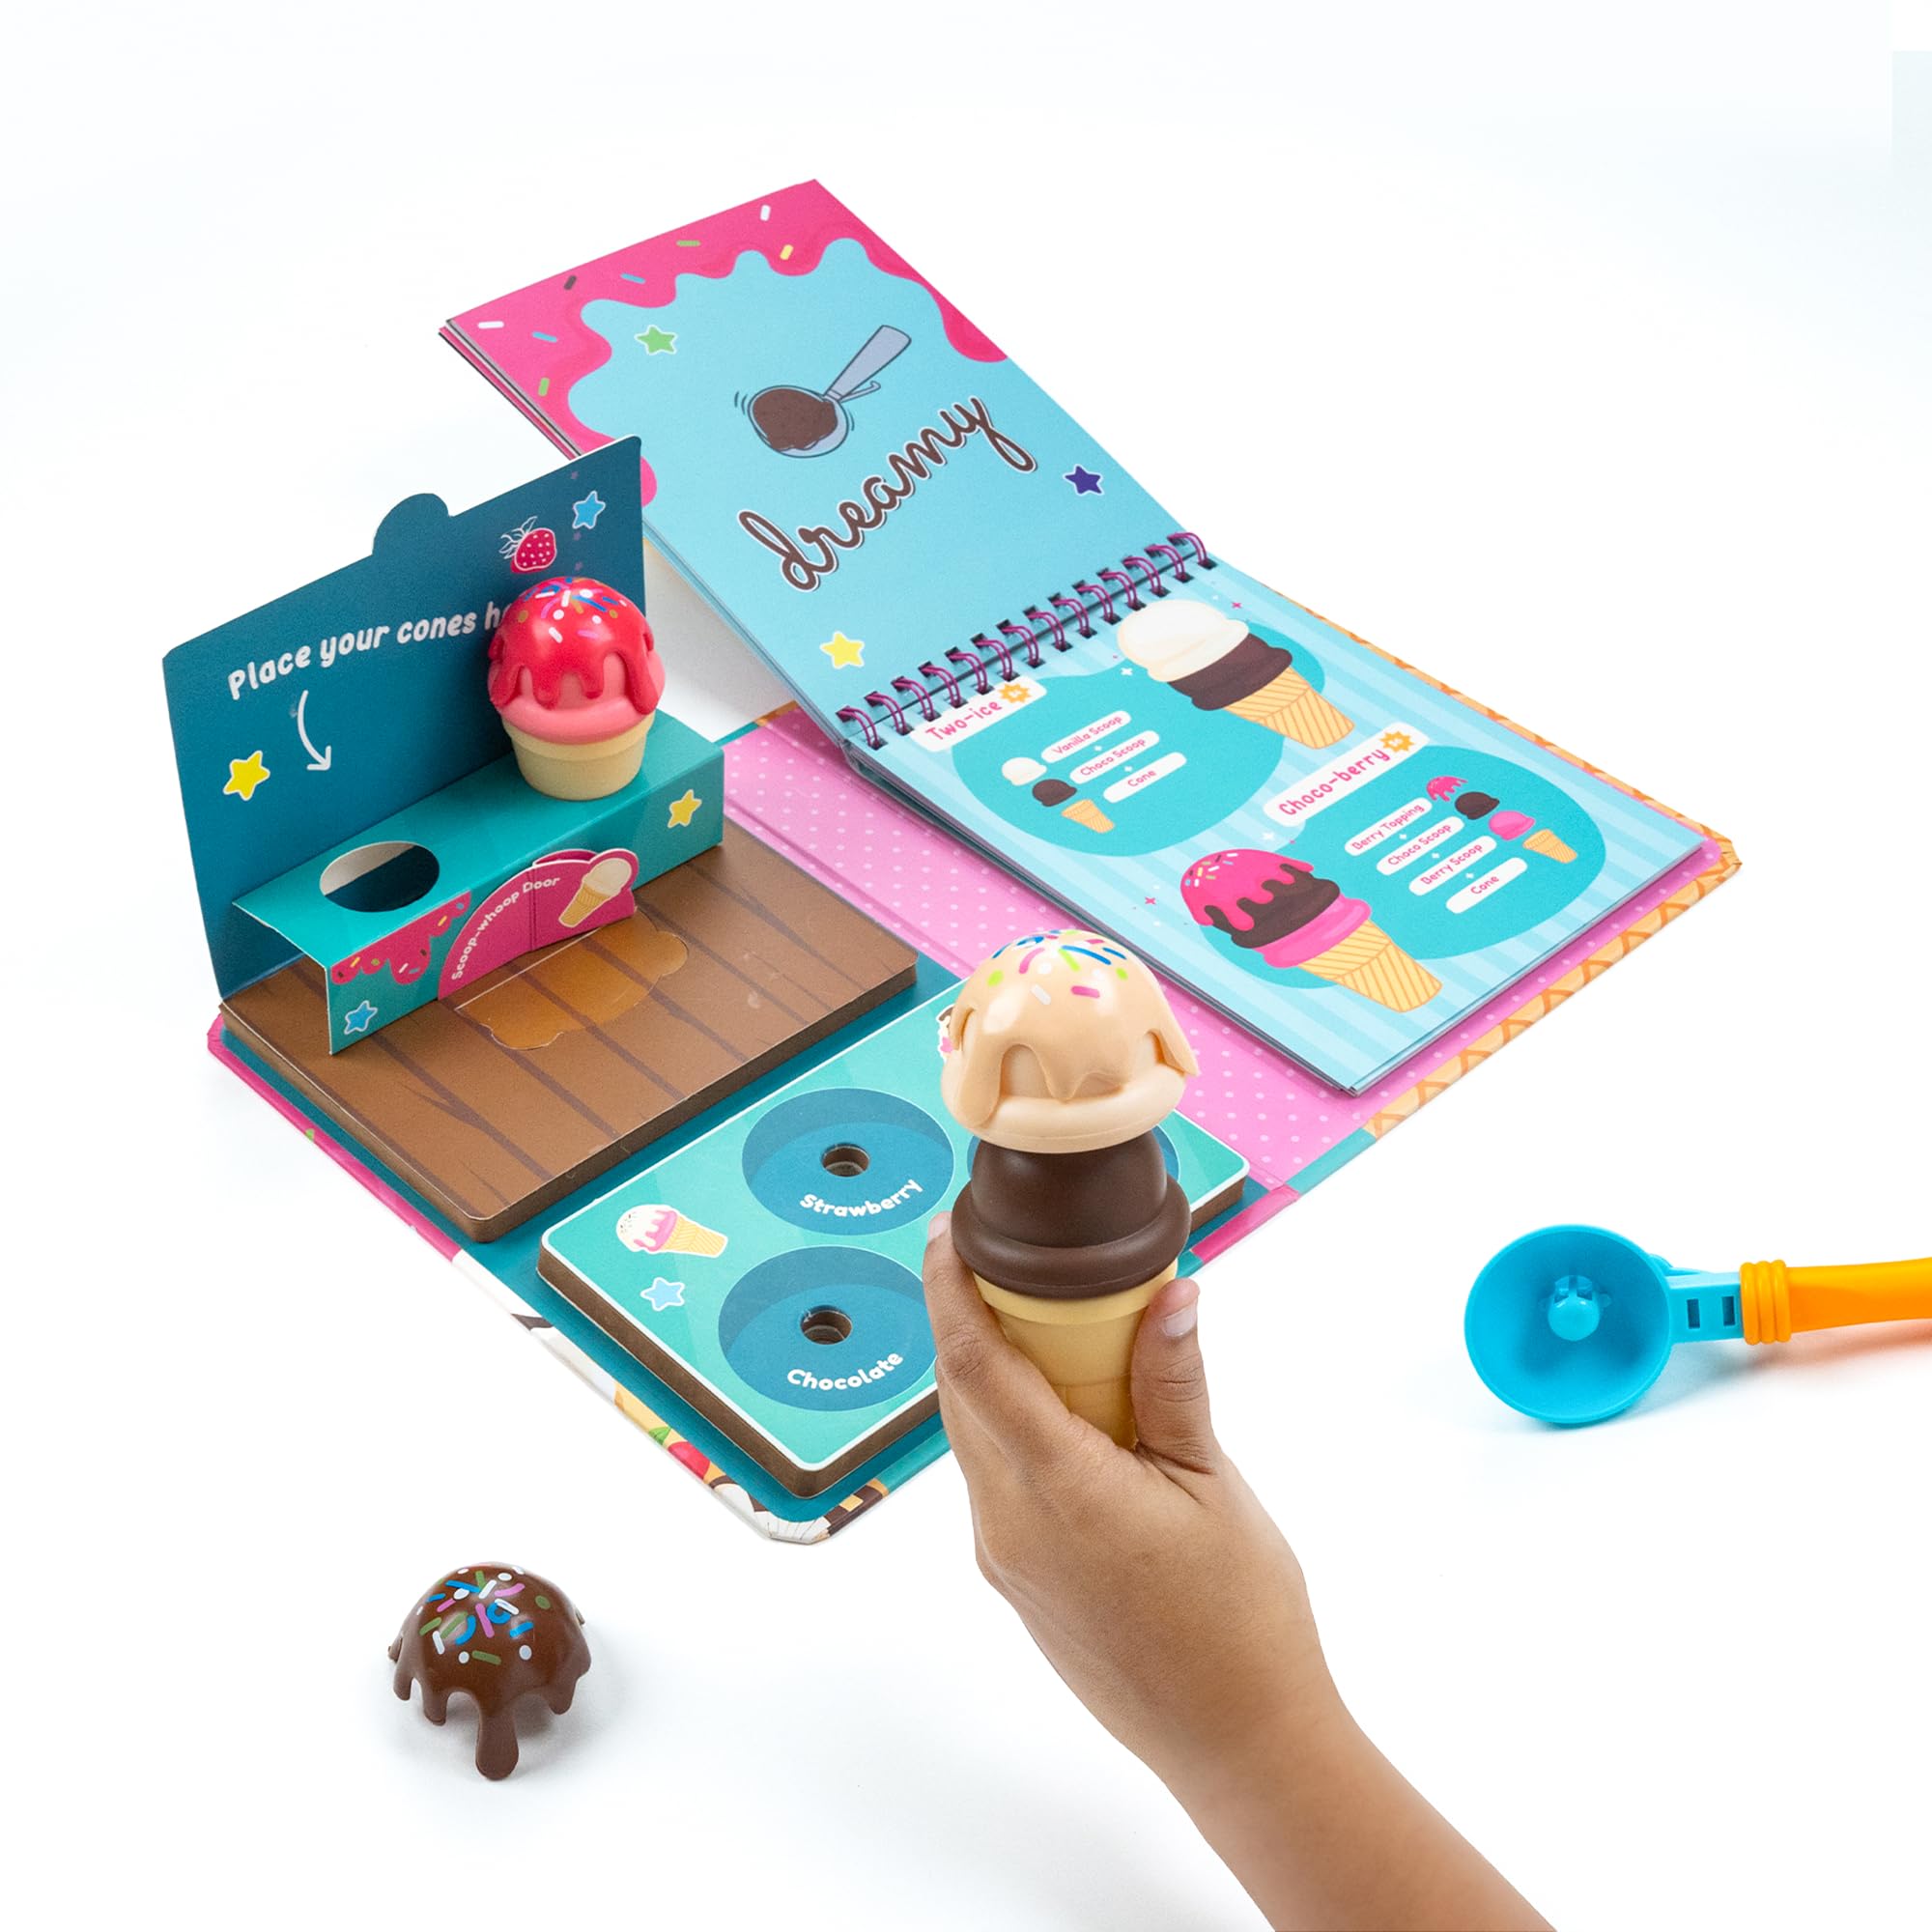 LoveDabble Ice-Cream Wonderland! Dream of Ice Cream Cooking Fun: 100+ Ways to Play with Flavors, Cones, Toppings, and an Ice-Cream Shop! Plus, Solve 25+ Sequence-Based Puzzles Birthday Gifts for Kids